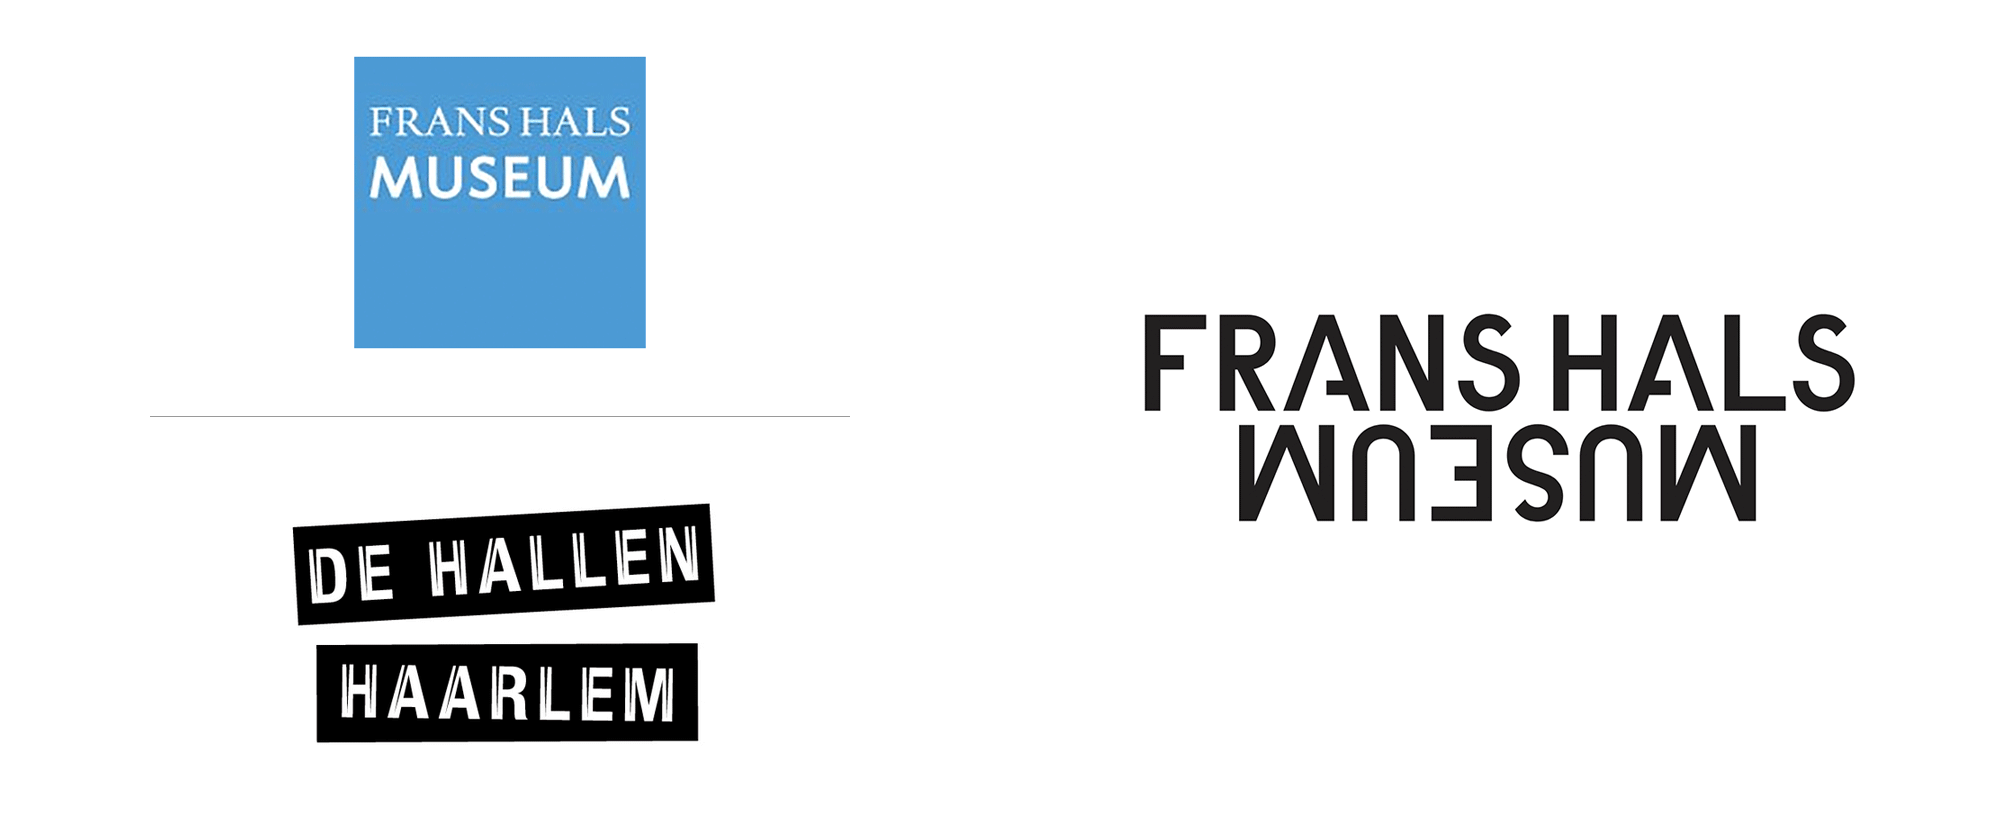 New Logo and Identity for Frans Hals Museum by KesselsKramer